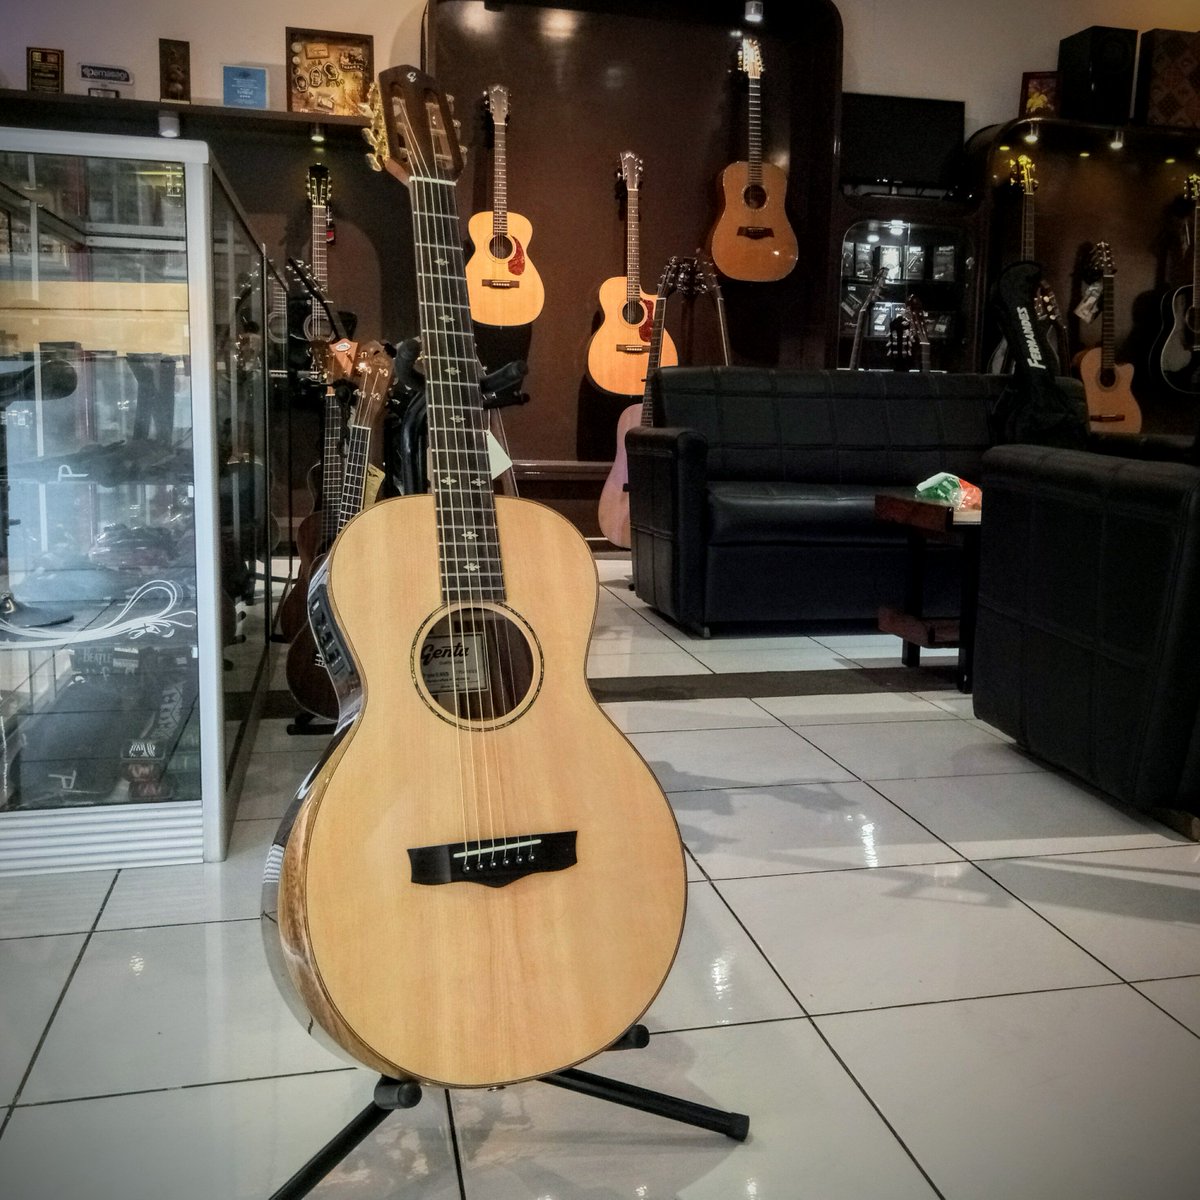 Get this beautiful #Gentaguitar #Pseries with #Fishmanelectronics #Presysblend on kitharra.com & meet the unique tonal of #solidwoodguitar! Have a great lunch!